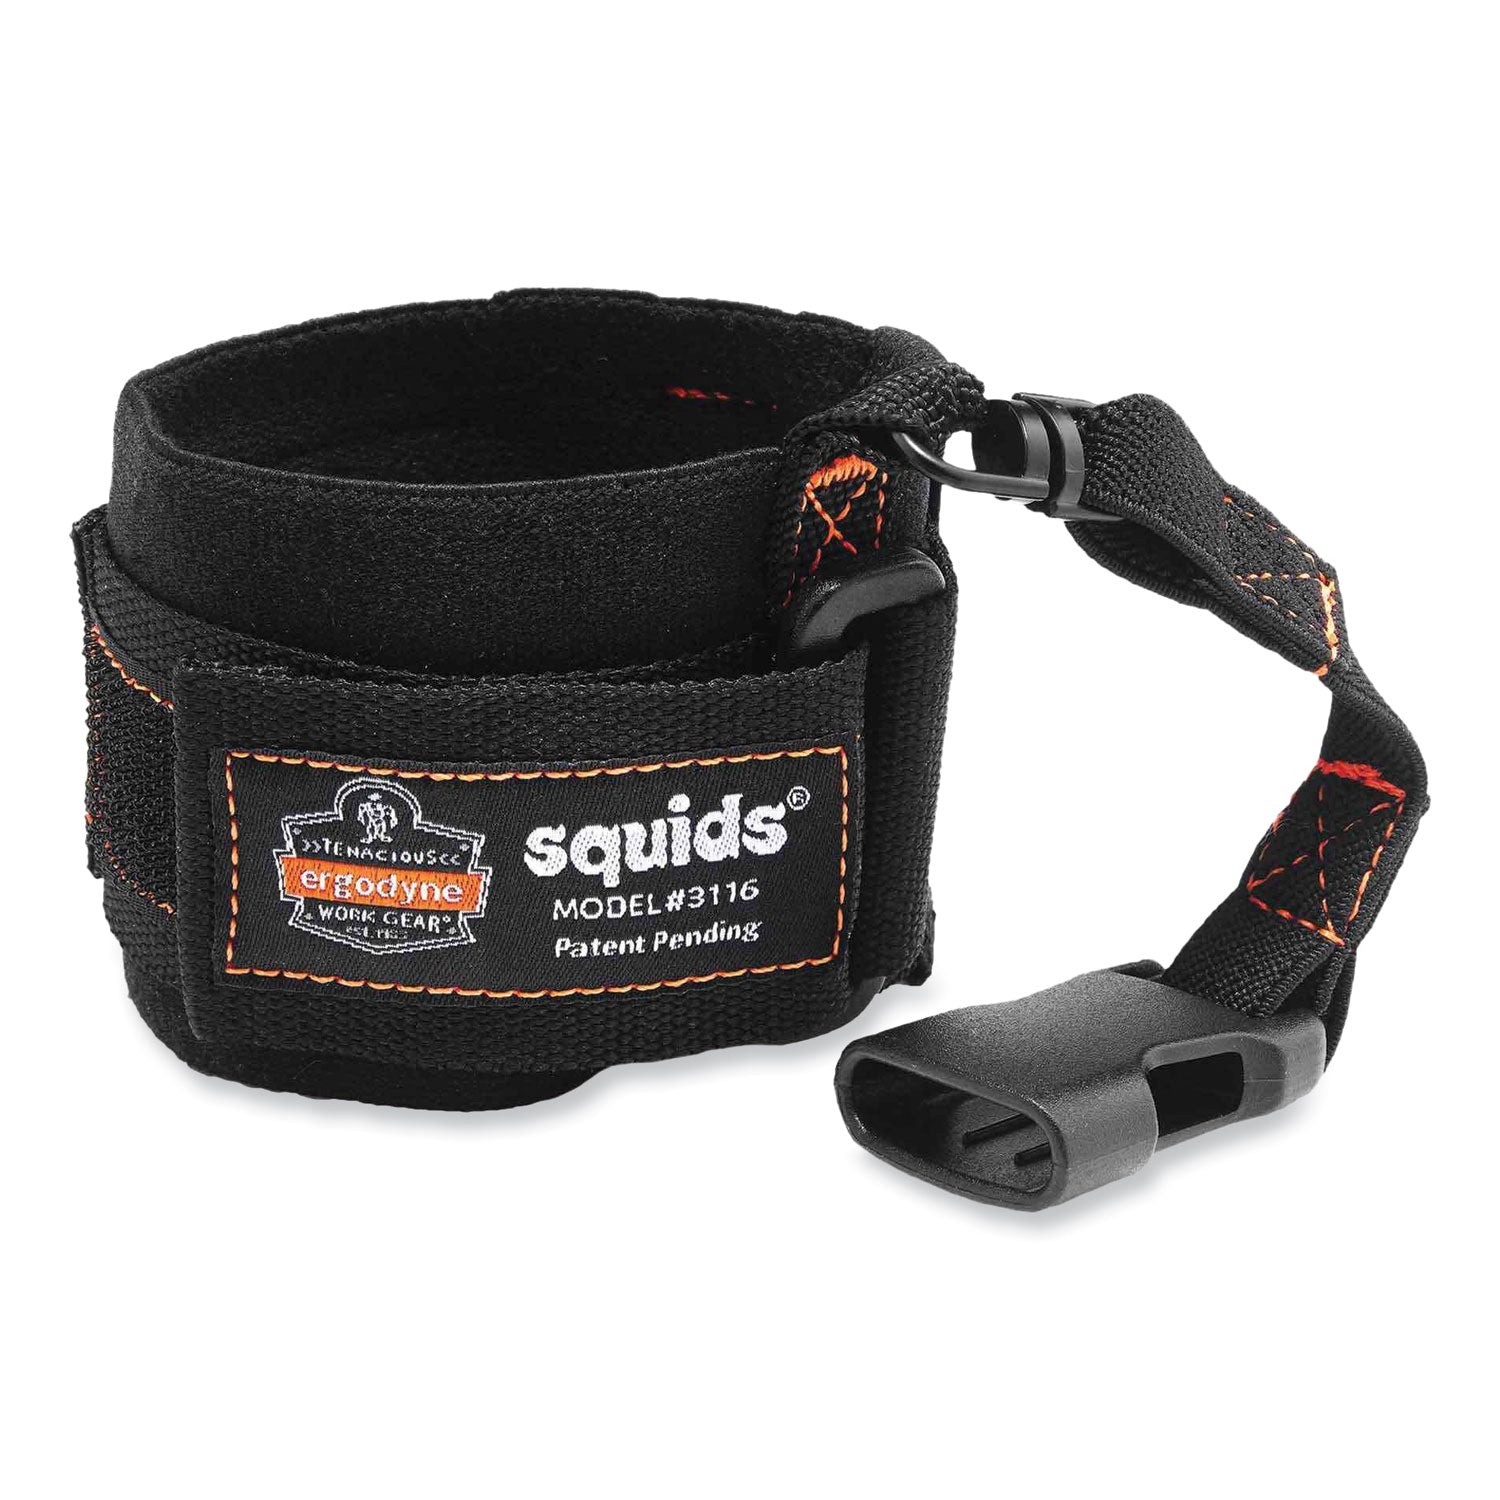 squids-3116-pull-on-wrist-lanyard-with-buckle-3-lb-max-working-capacity-75-long-black-ships-in-1-3-business-days_ego19057 - 1